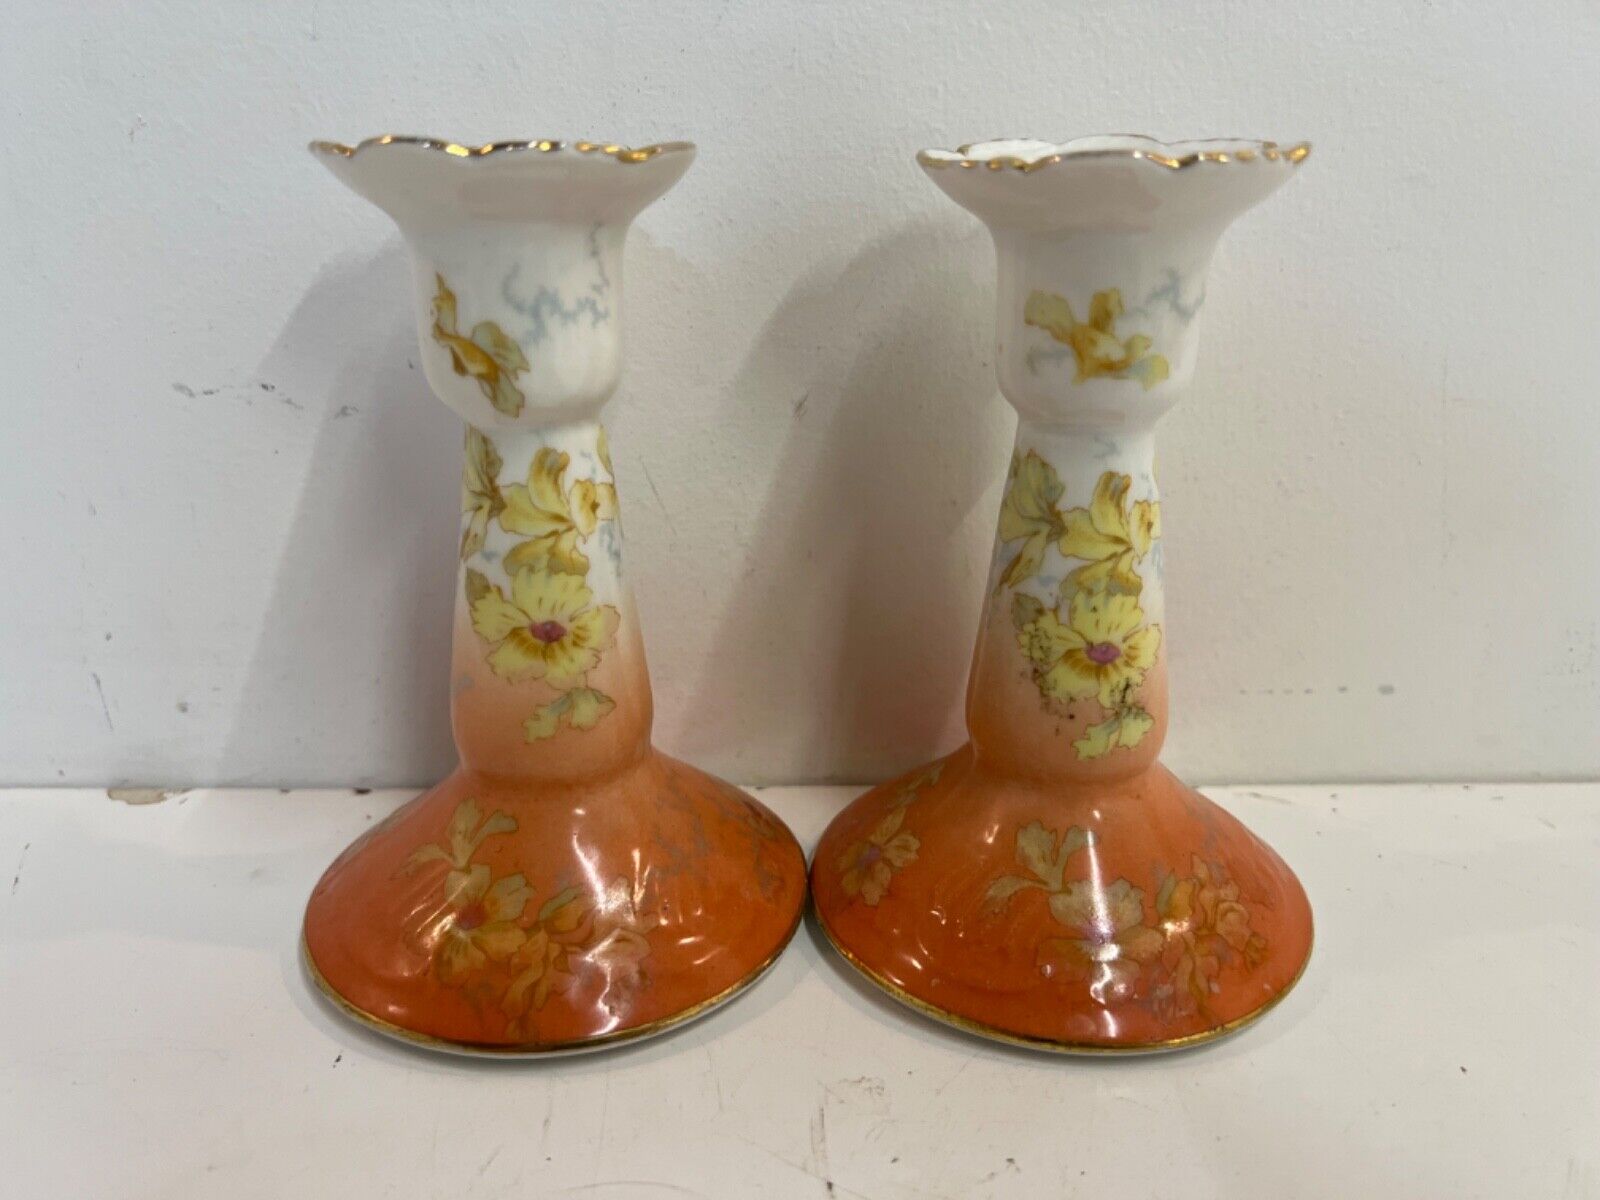 Antique Gustave Demartial & Cie Limoges Pair of Candlesticks with Floral Dec.